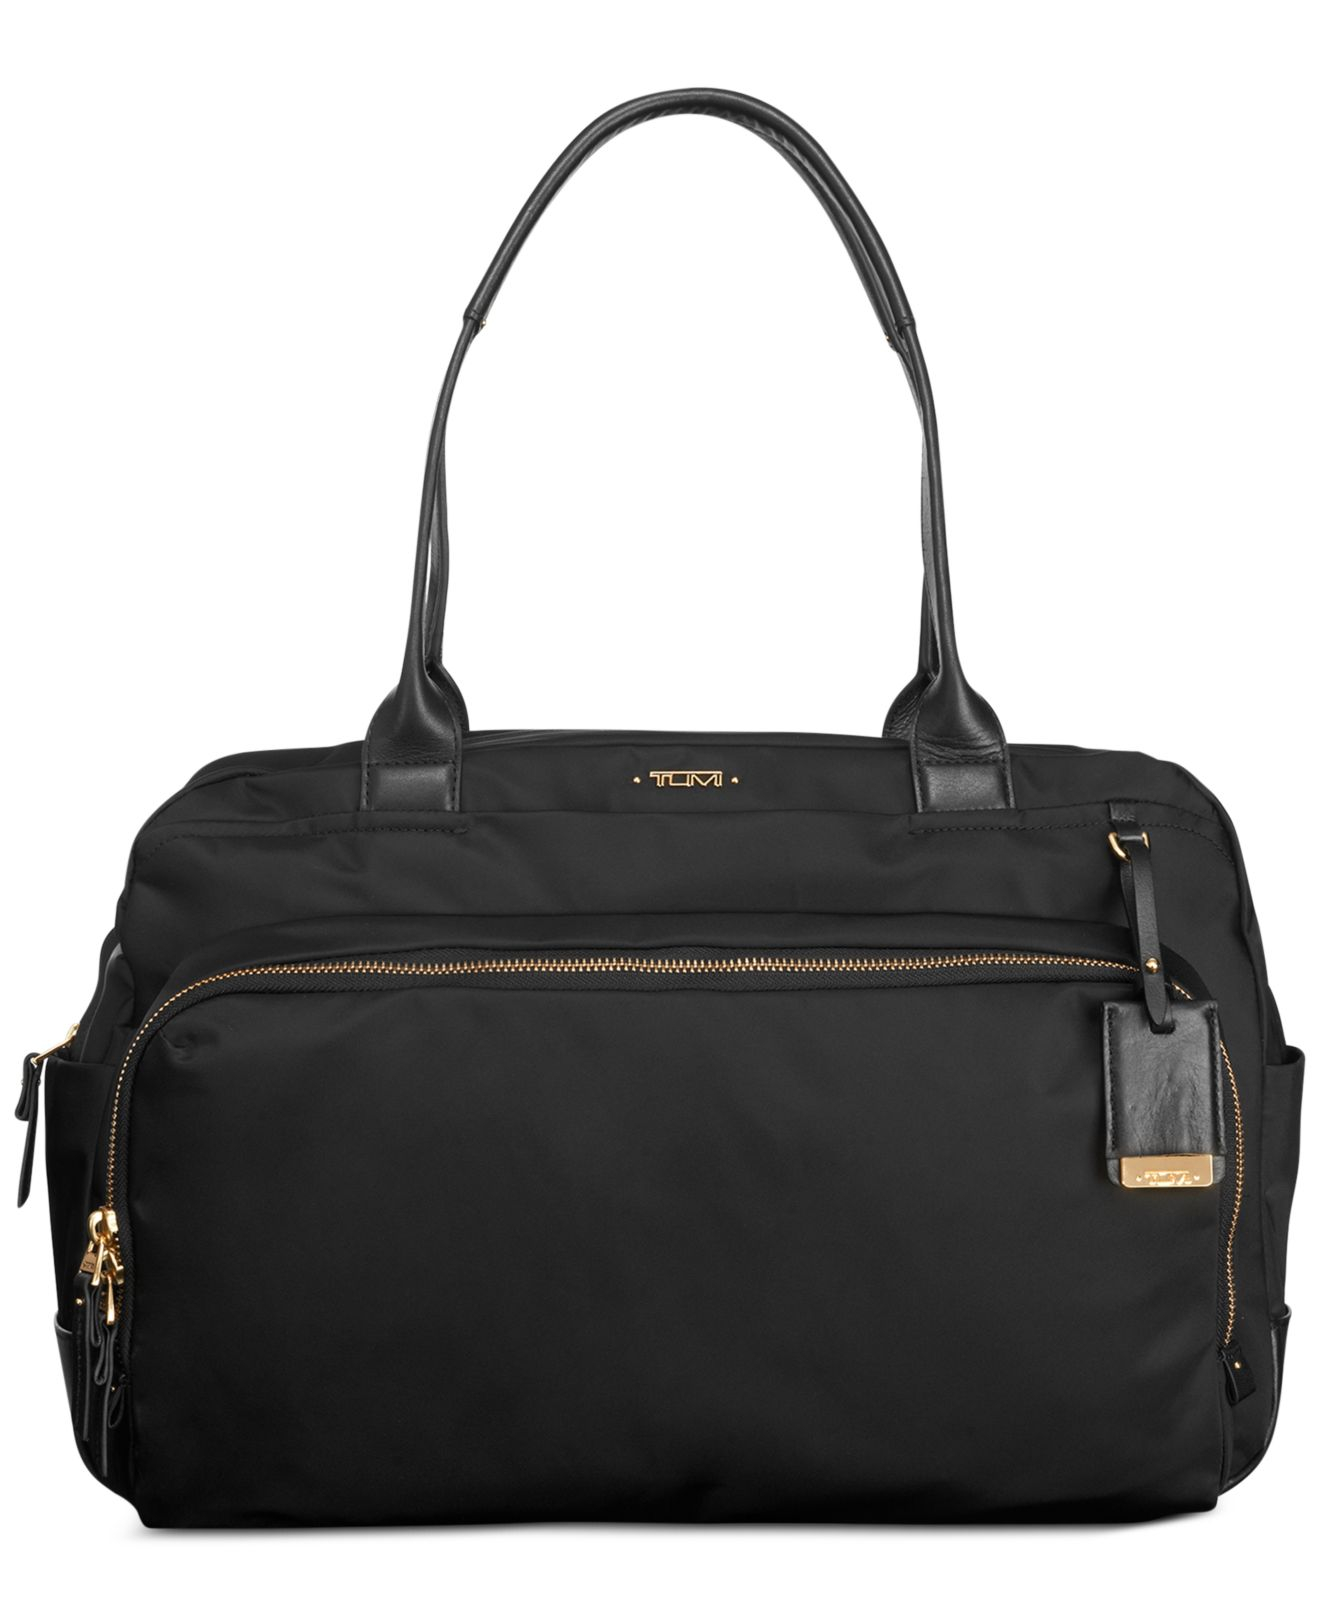 Lyst - Tumi Voyageur Athens Carry-all Laptop Bag in Black